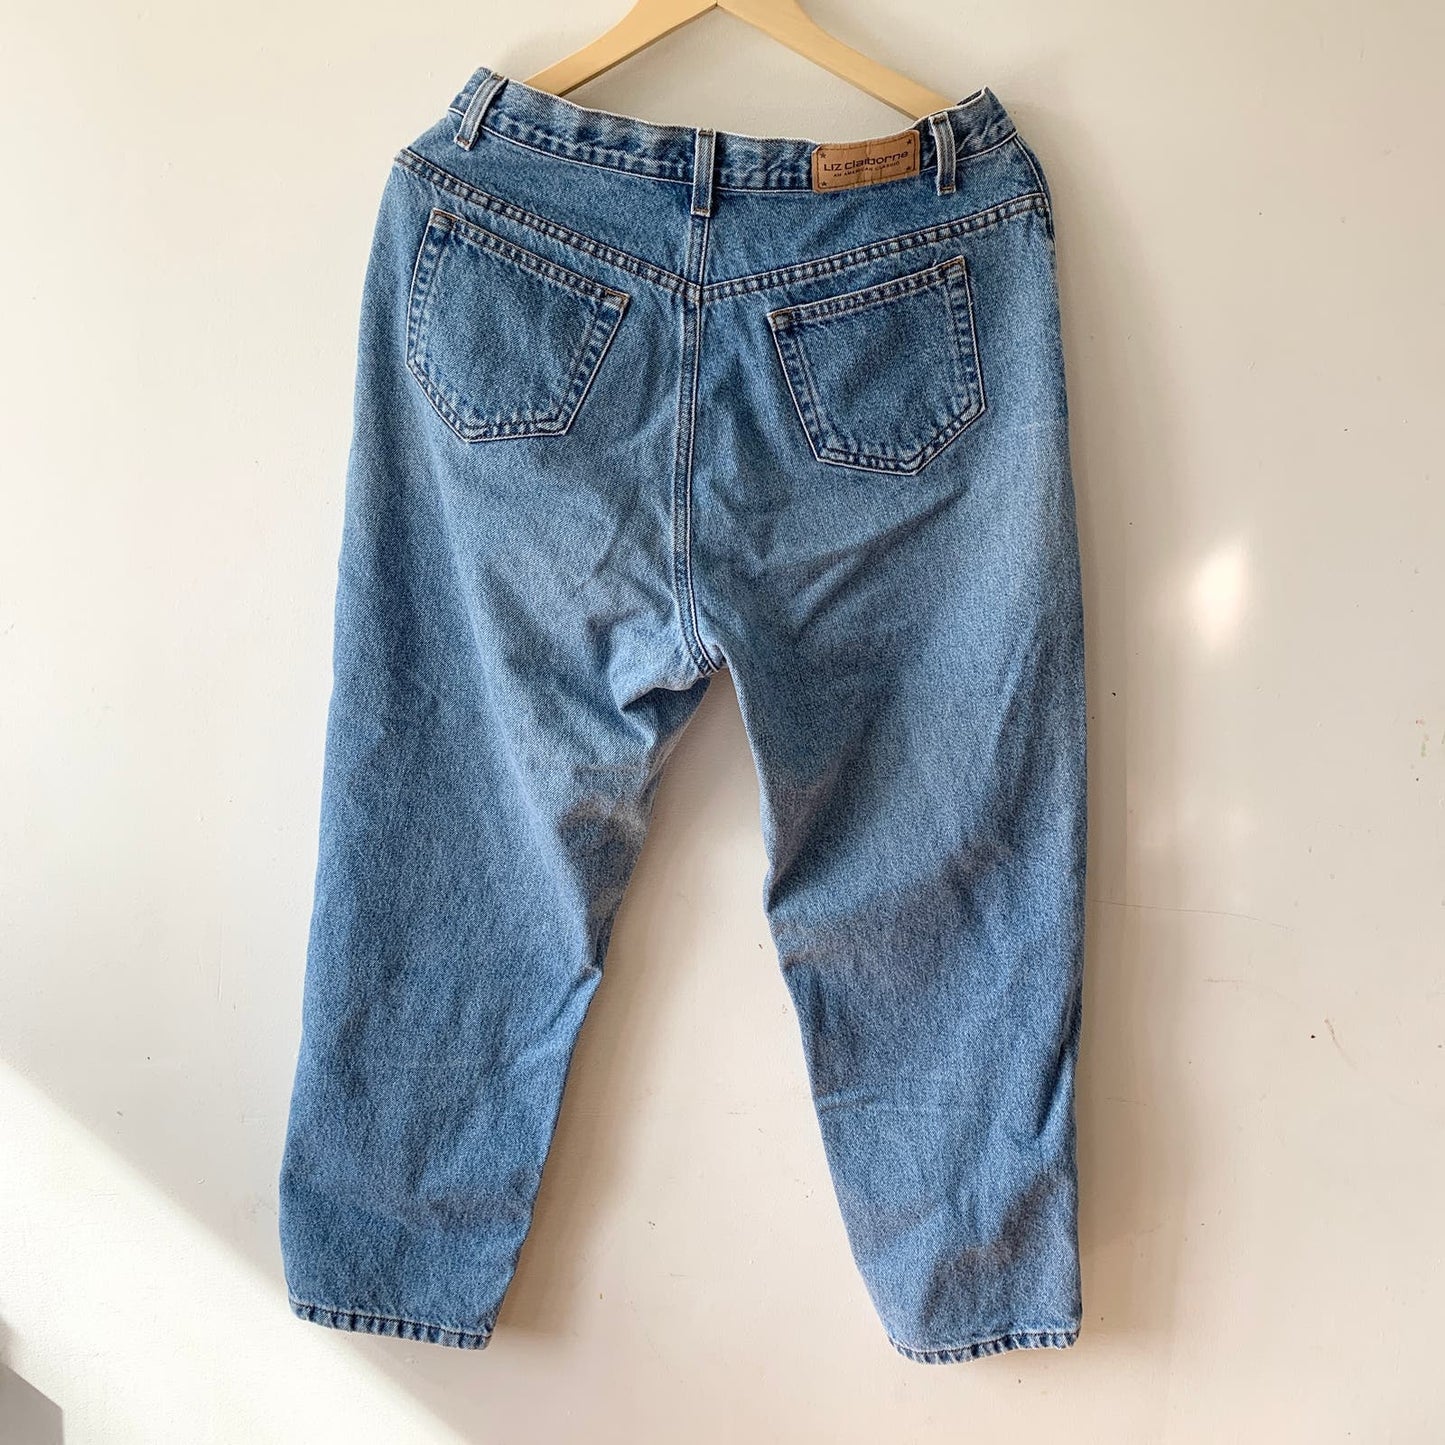 Liz Claiborne Vintage Have to Have Classic Fit Straight Mom 90s Jeans 14 Short